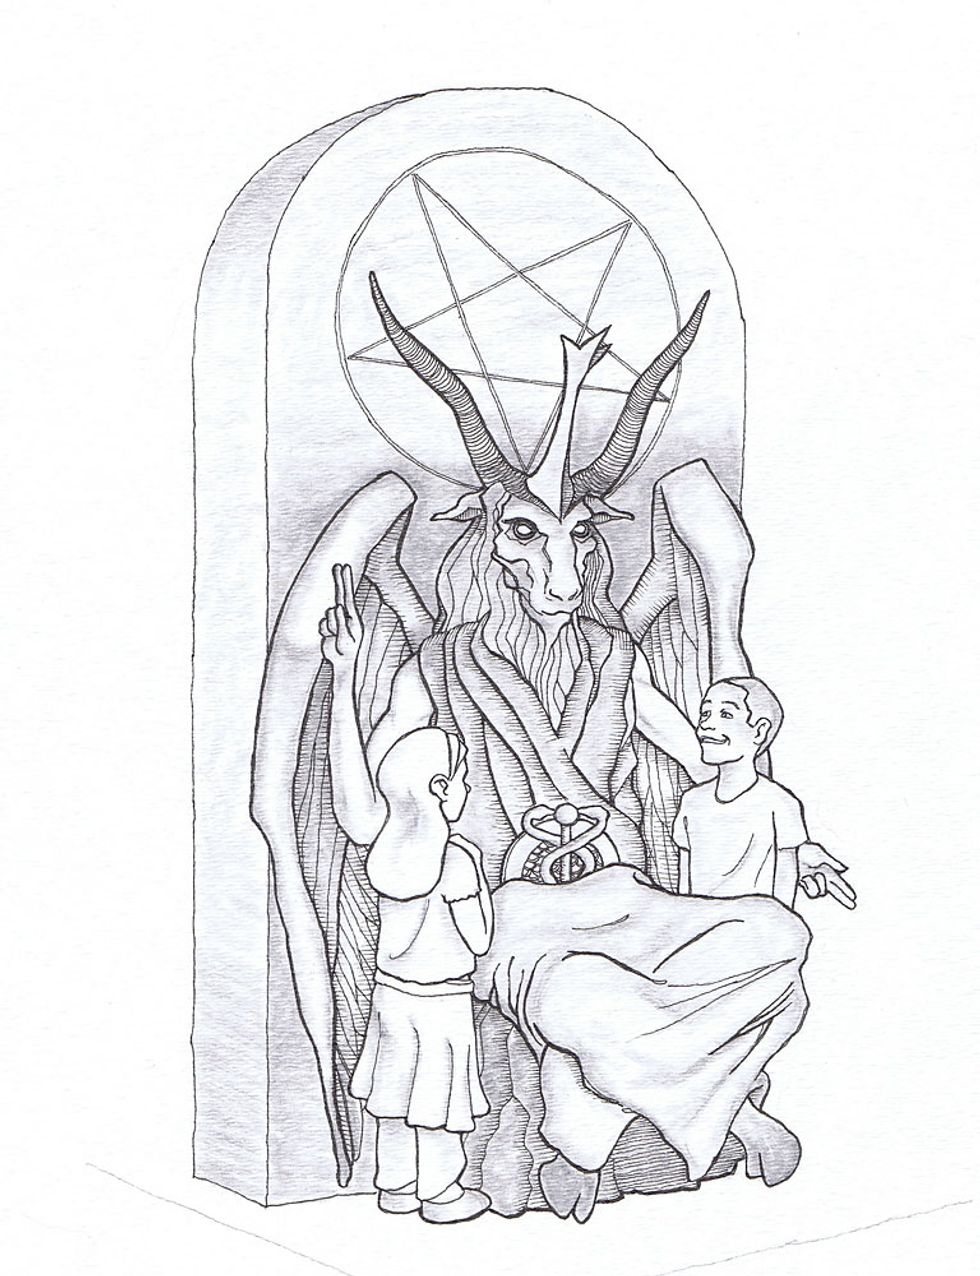 Satanic Temple Unveils Beautiful Artist's Rendering Of Its Sweet Dark Lord For Oklahoma Capitol